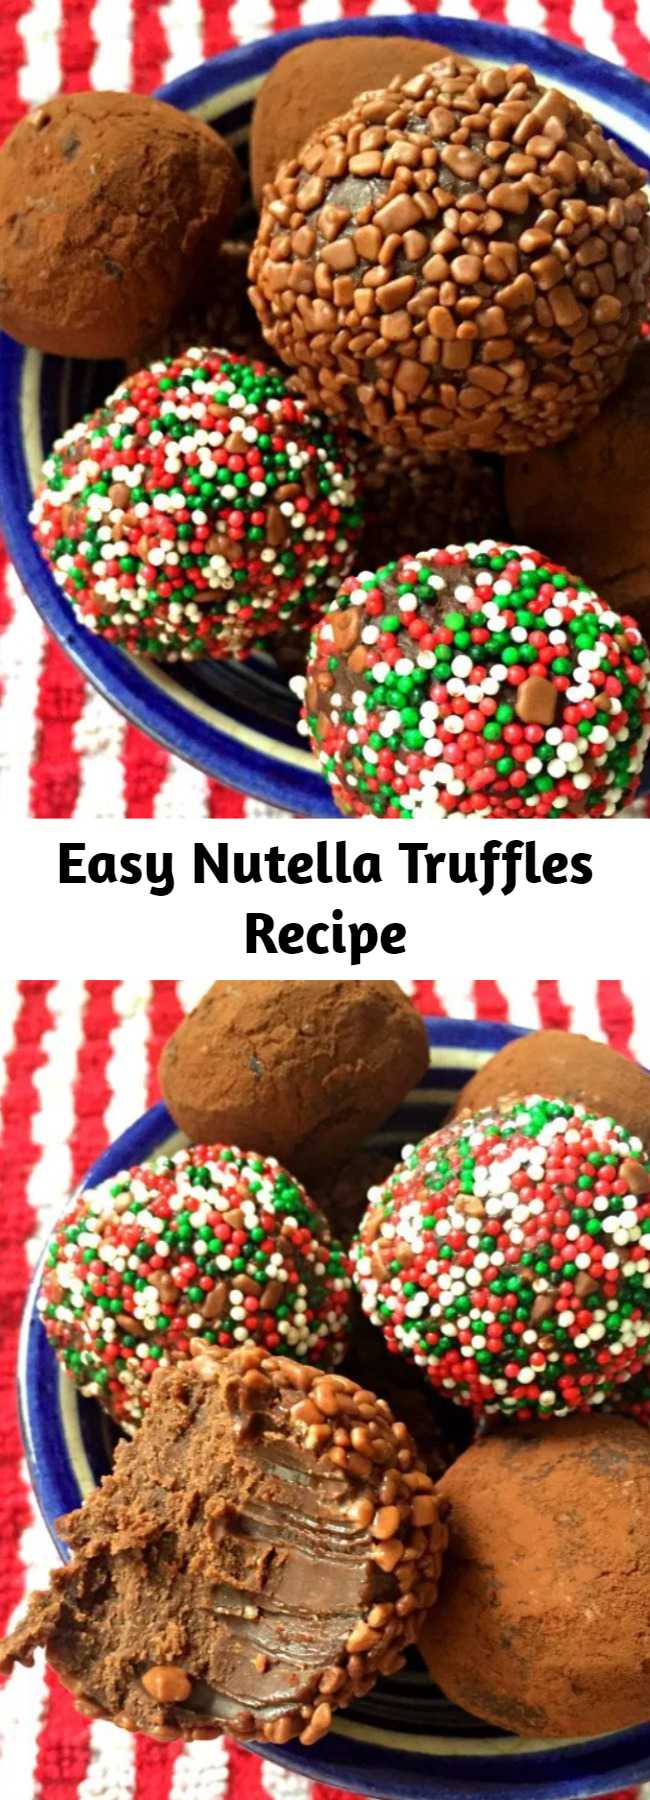 Easy Nutella Truffles Recipe - Easy Nutella Truffles with all the yummy hazlenut flavour of Nutella – and only three ingredients! They’re no-bake, with all the usual deliciousness of a regular chocolate truffle.. and then the extra chocolate hazlenut hit of Nutella 😍.